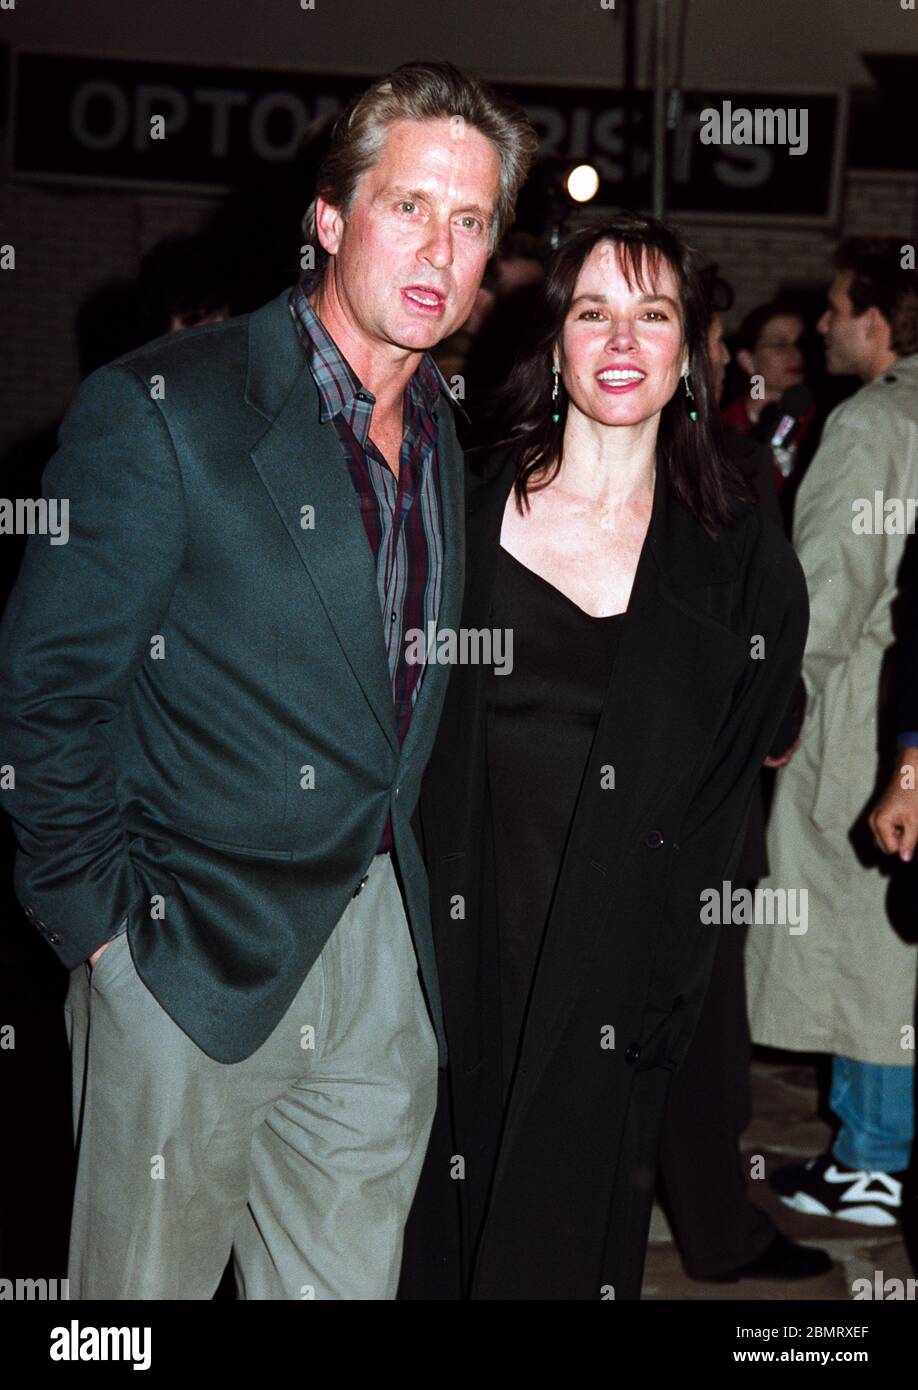 LOS ANGELES, CA. February 22, 1993:  Actor Michael Douglas & actress Barbara Hershey at the premiere of 'Falling Down' in Los Angeles.  File photo © Paul Smith/Featureflash Stock Photo